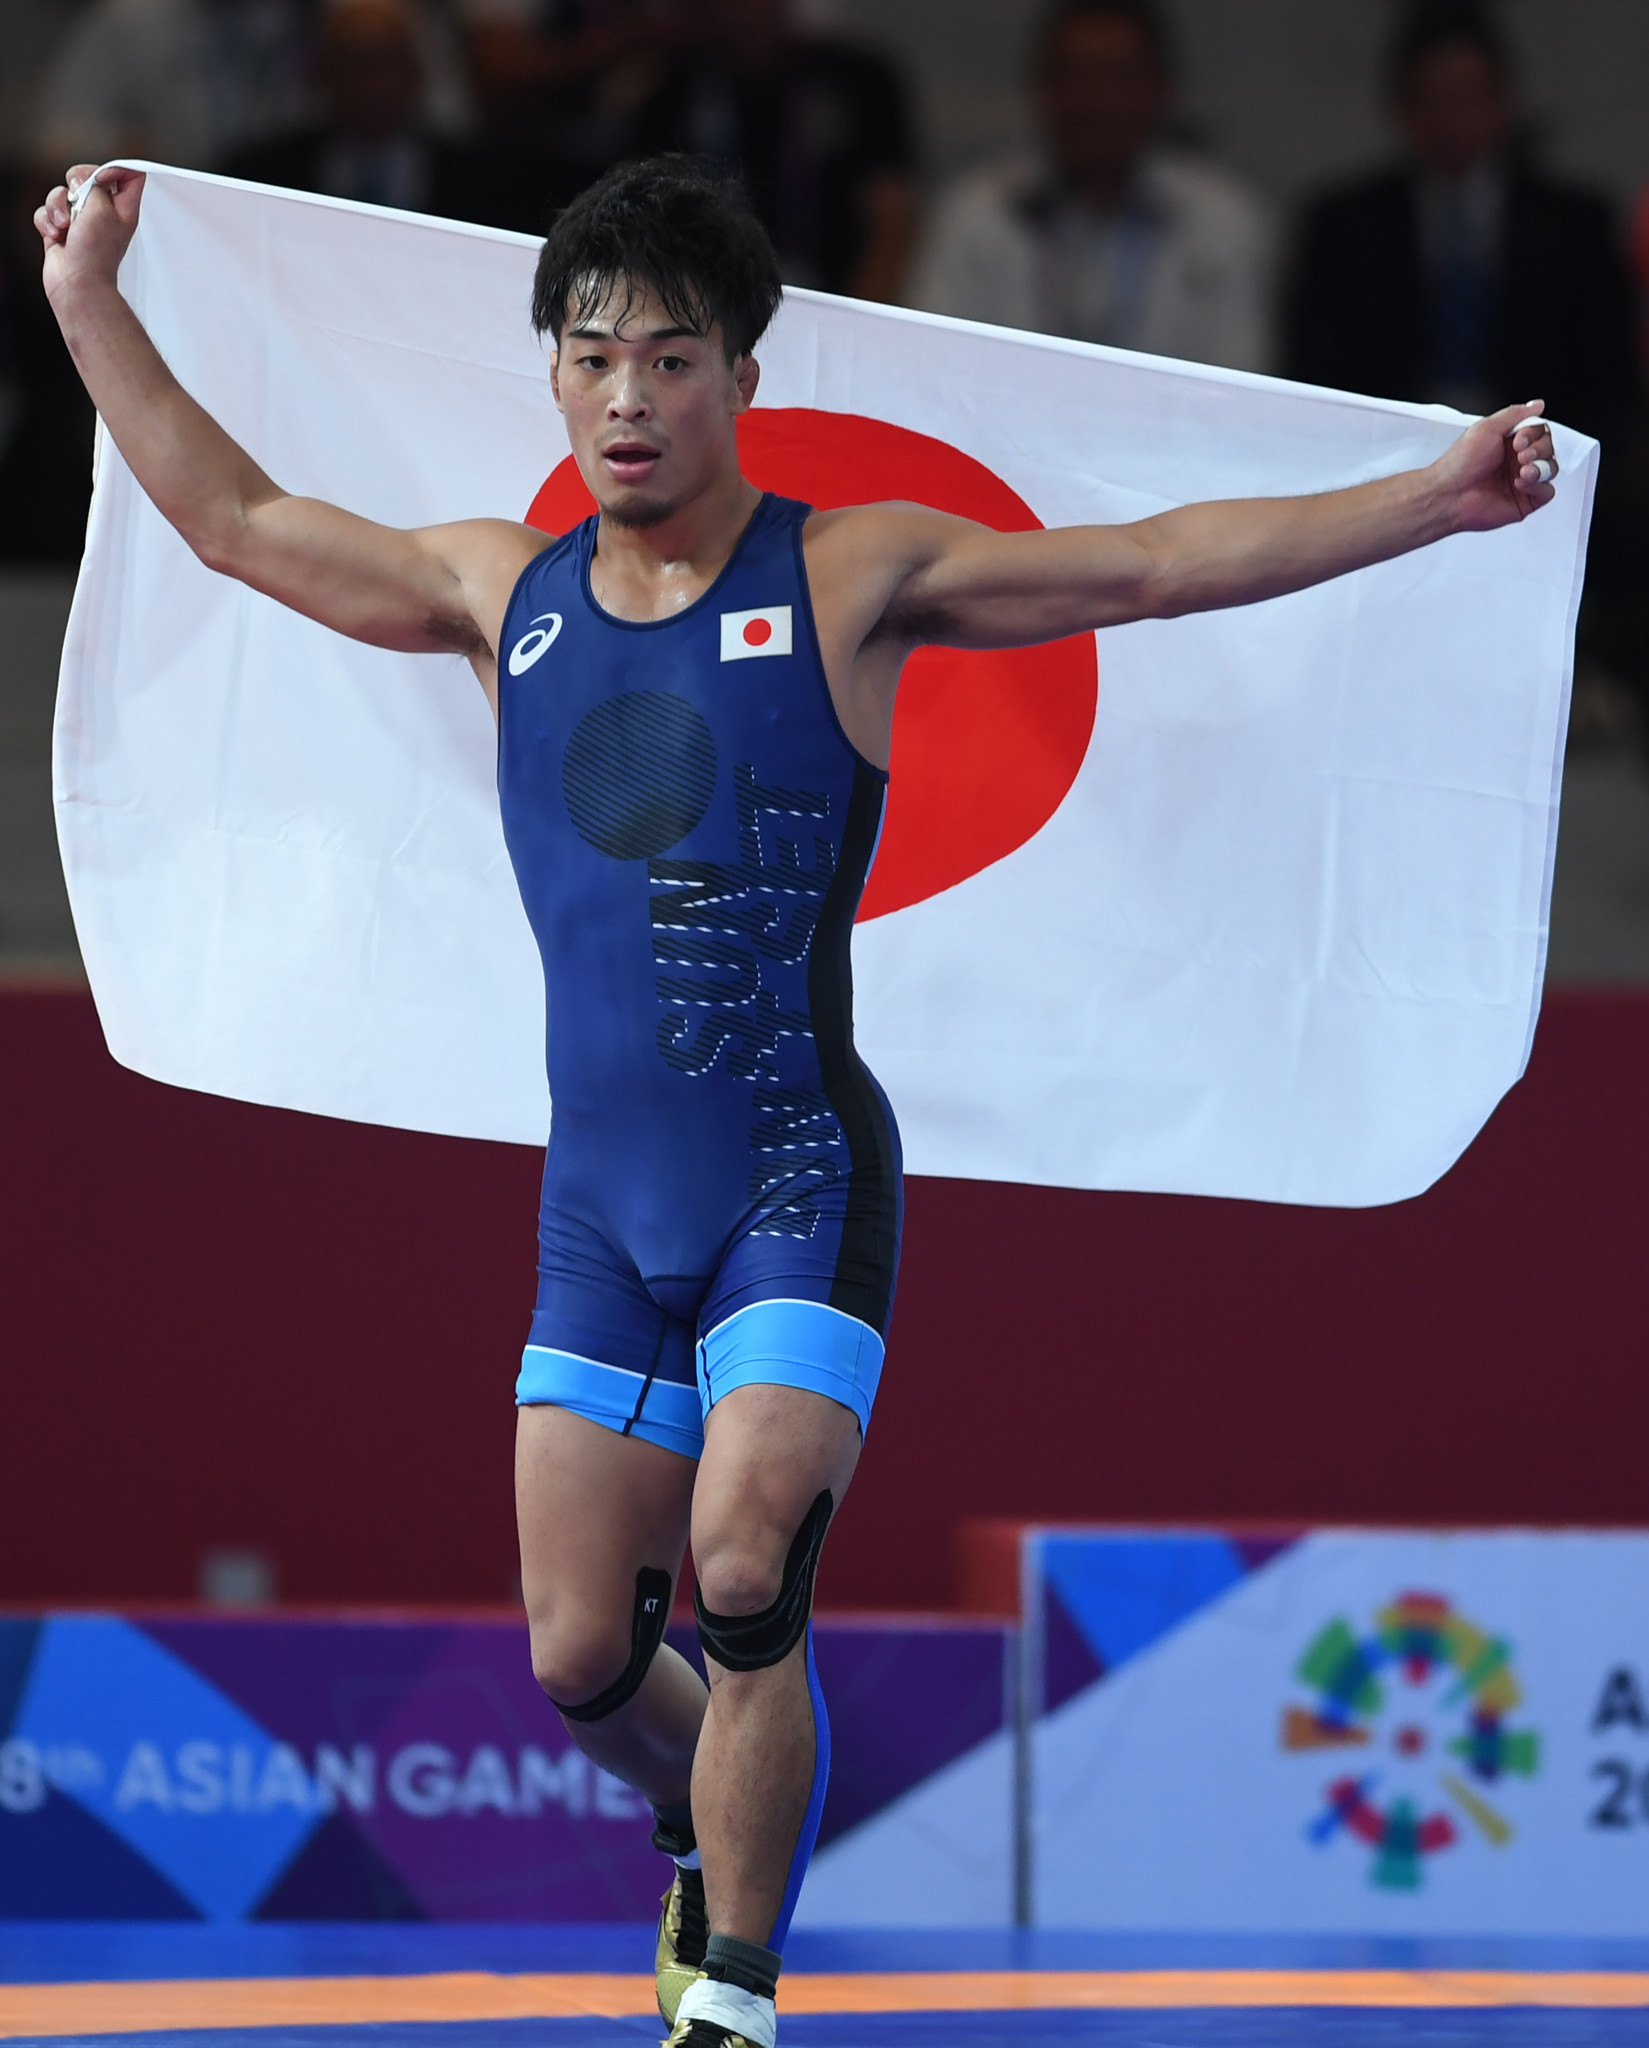 Shinobu Ota won World Championship gold for Japan on the first day of finals ©Getty Images